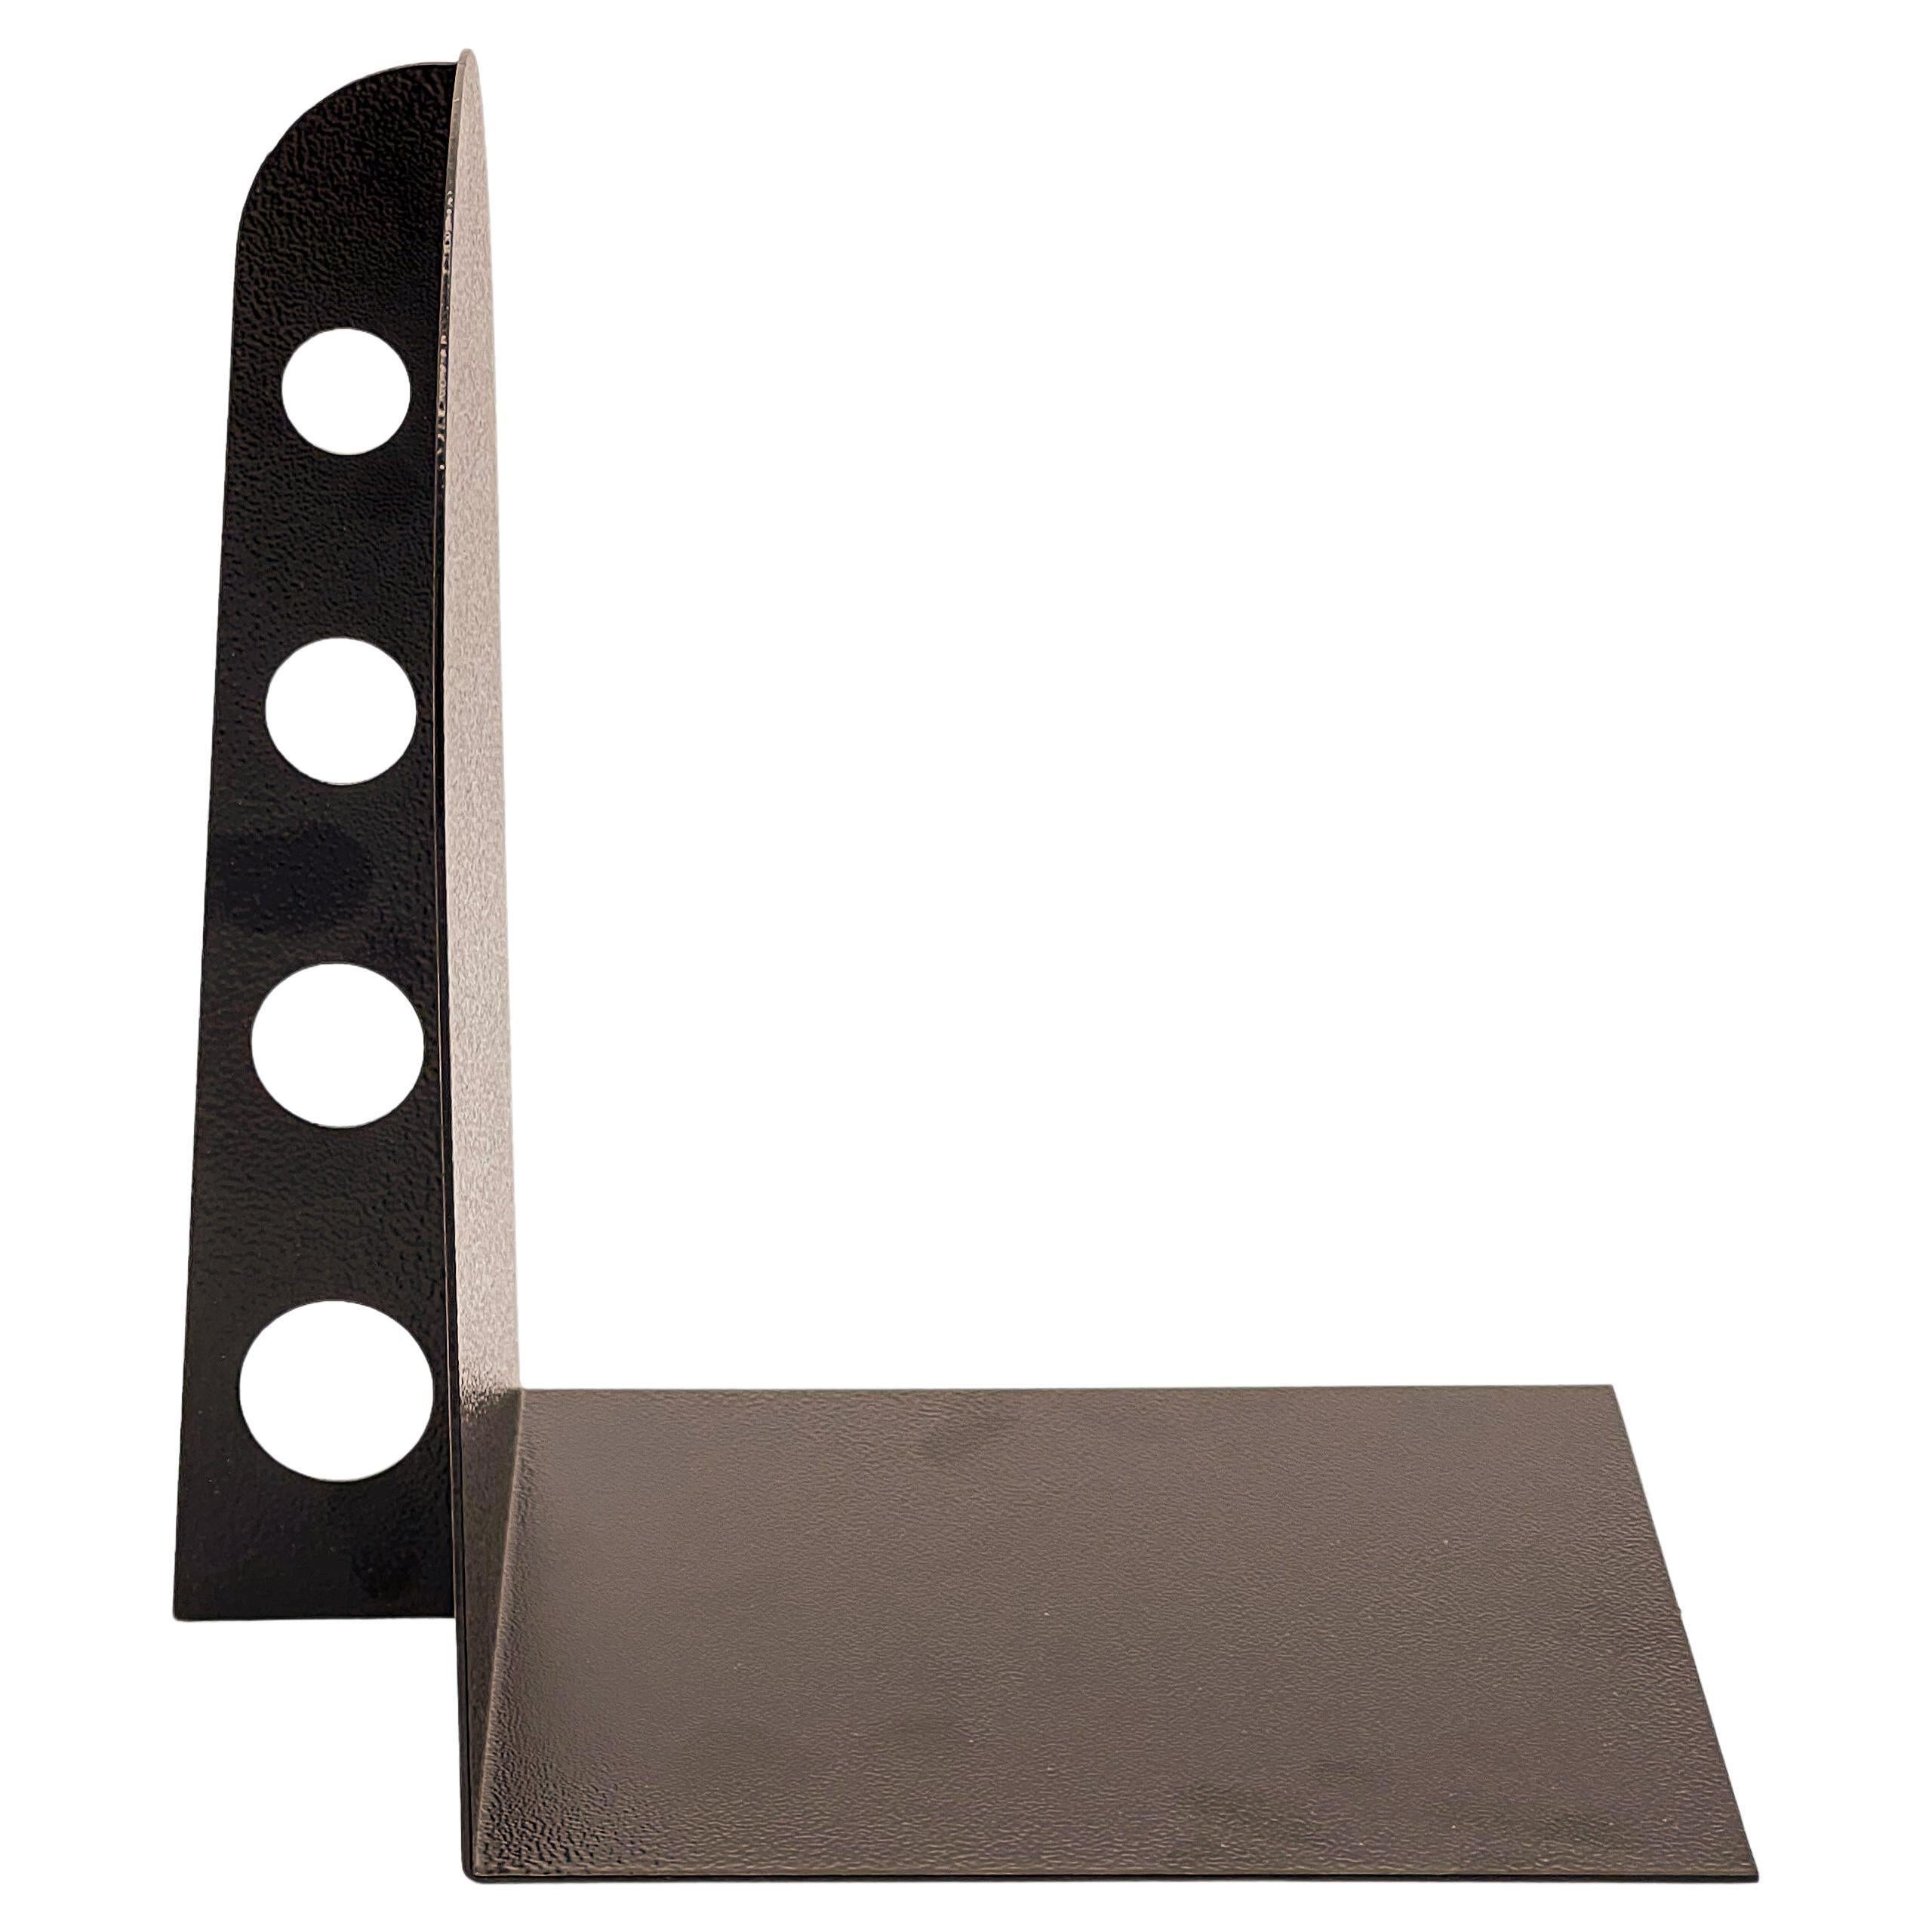 Contemporary 21st Century Capo Metal Bookend by Spinzi, Italian Modern Design In New Condition For Sale In Milano, IT